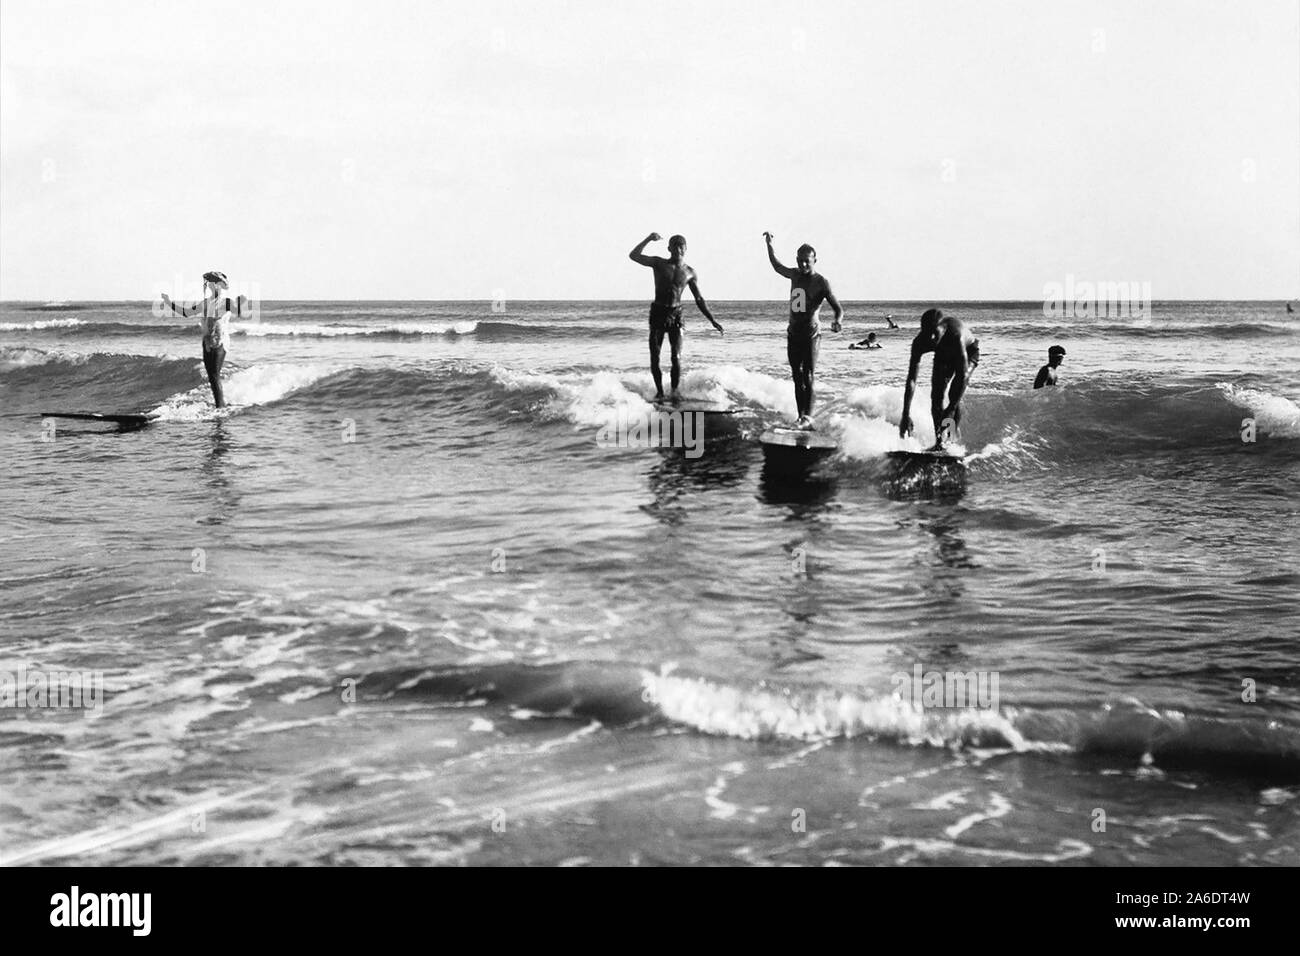 Vintage surfing photo from Waikiki Beach in Honolulu, Hawaii of surfers on wooden surfboards sharing a wave. Stock Photo